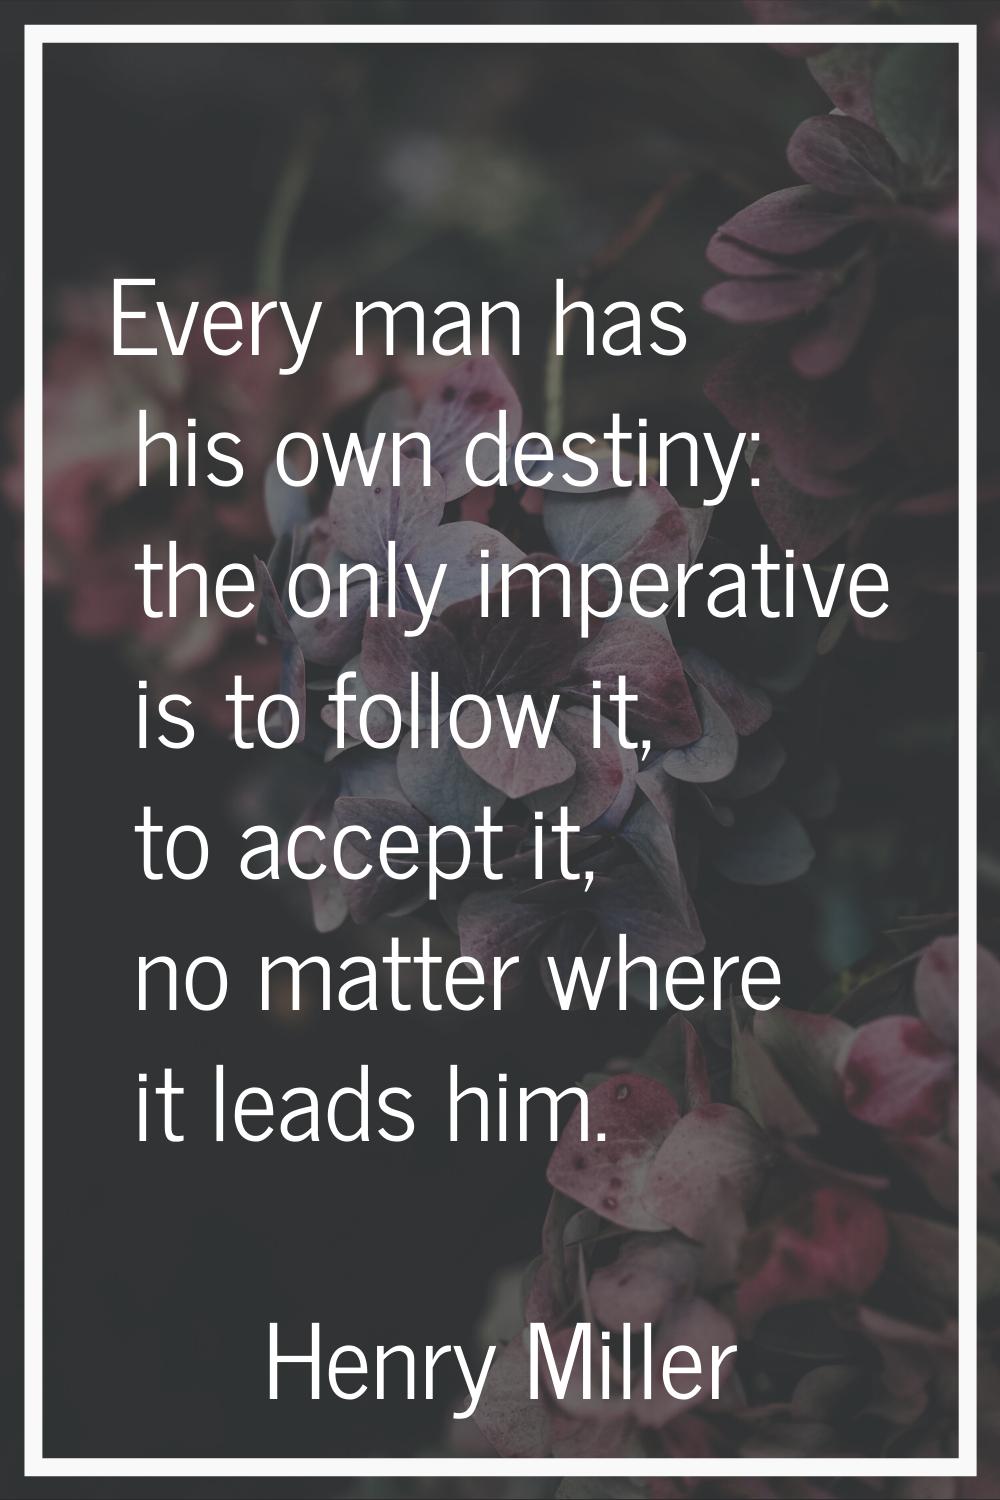 Every man has his own destiny: the only imperative is to follow it, to accept it, no matter where i